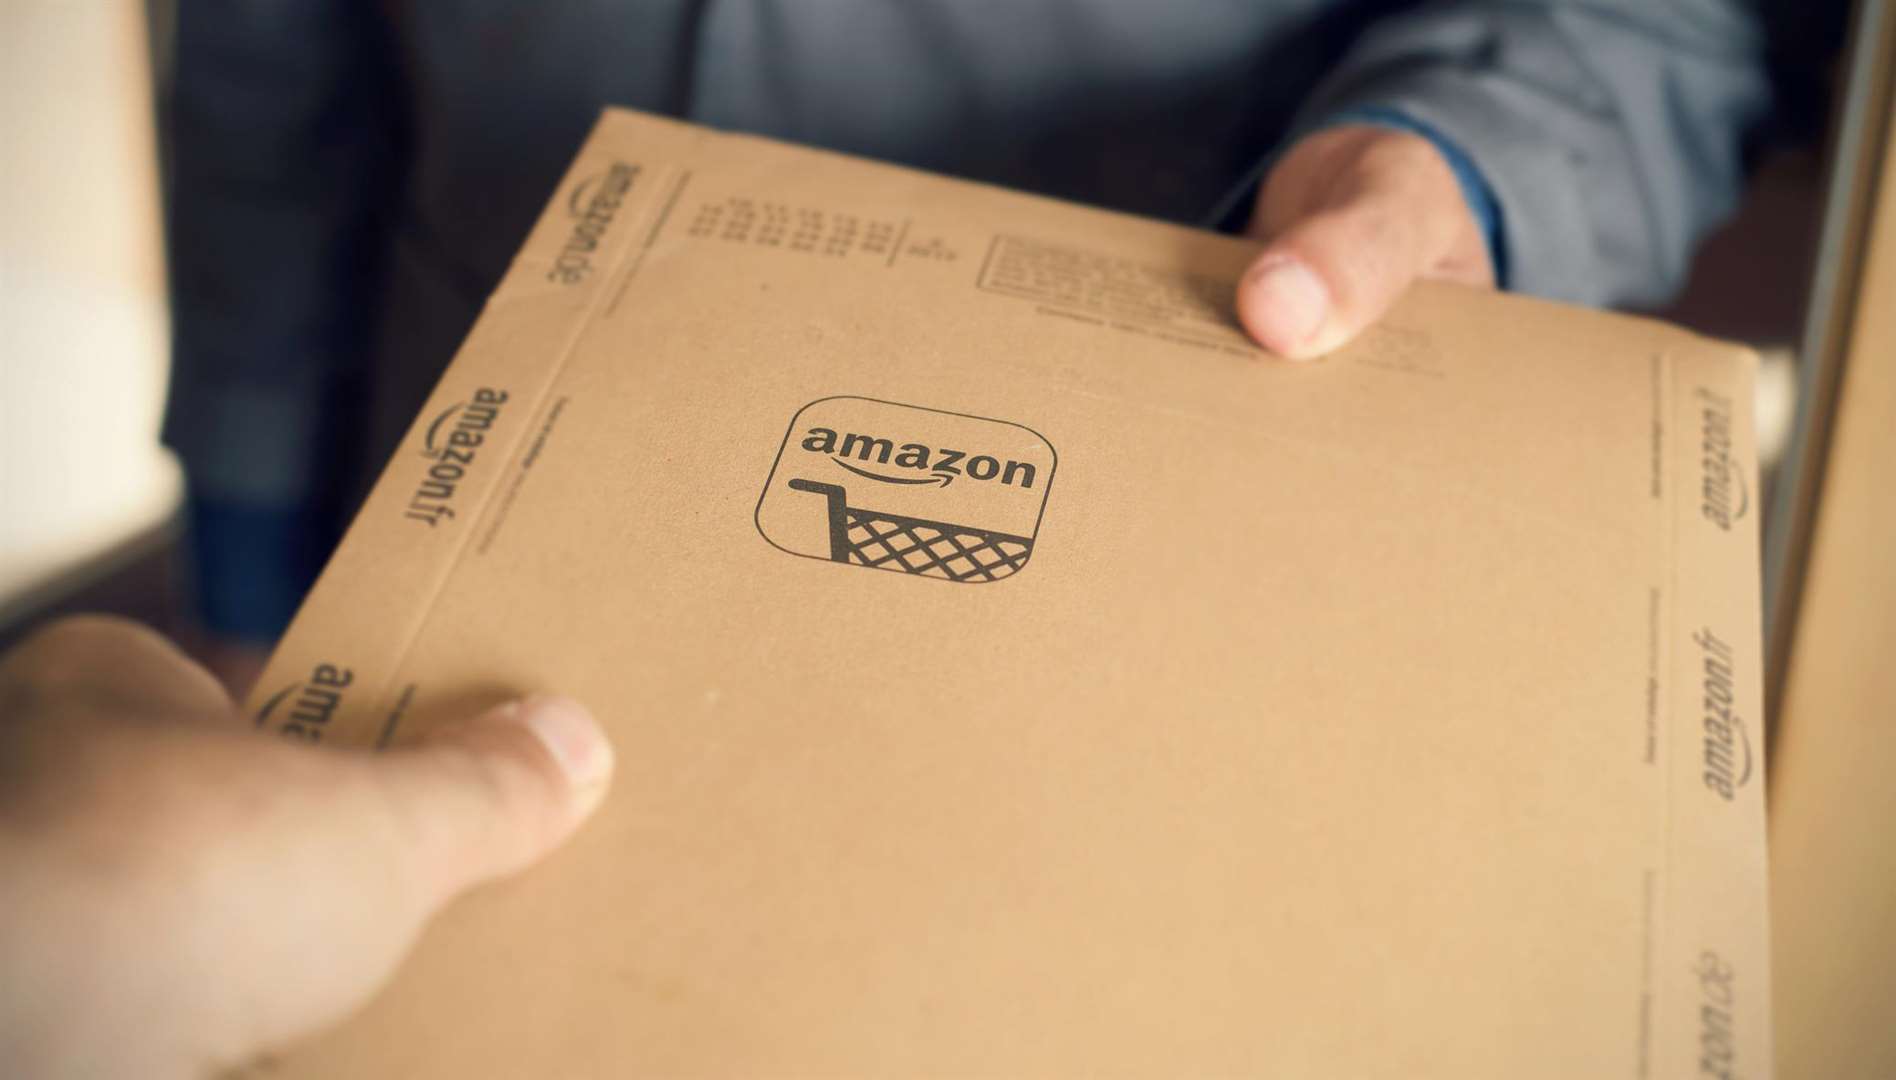 Amazon deliveries will be at a high during Prime Day, which gets underway on Monday, July 16